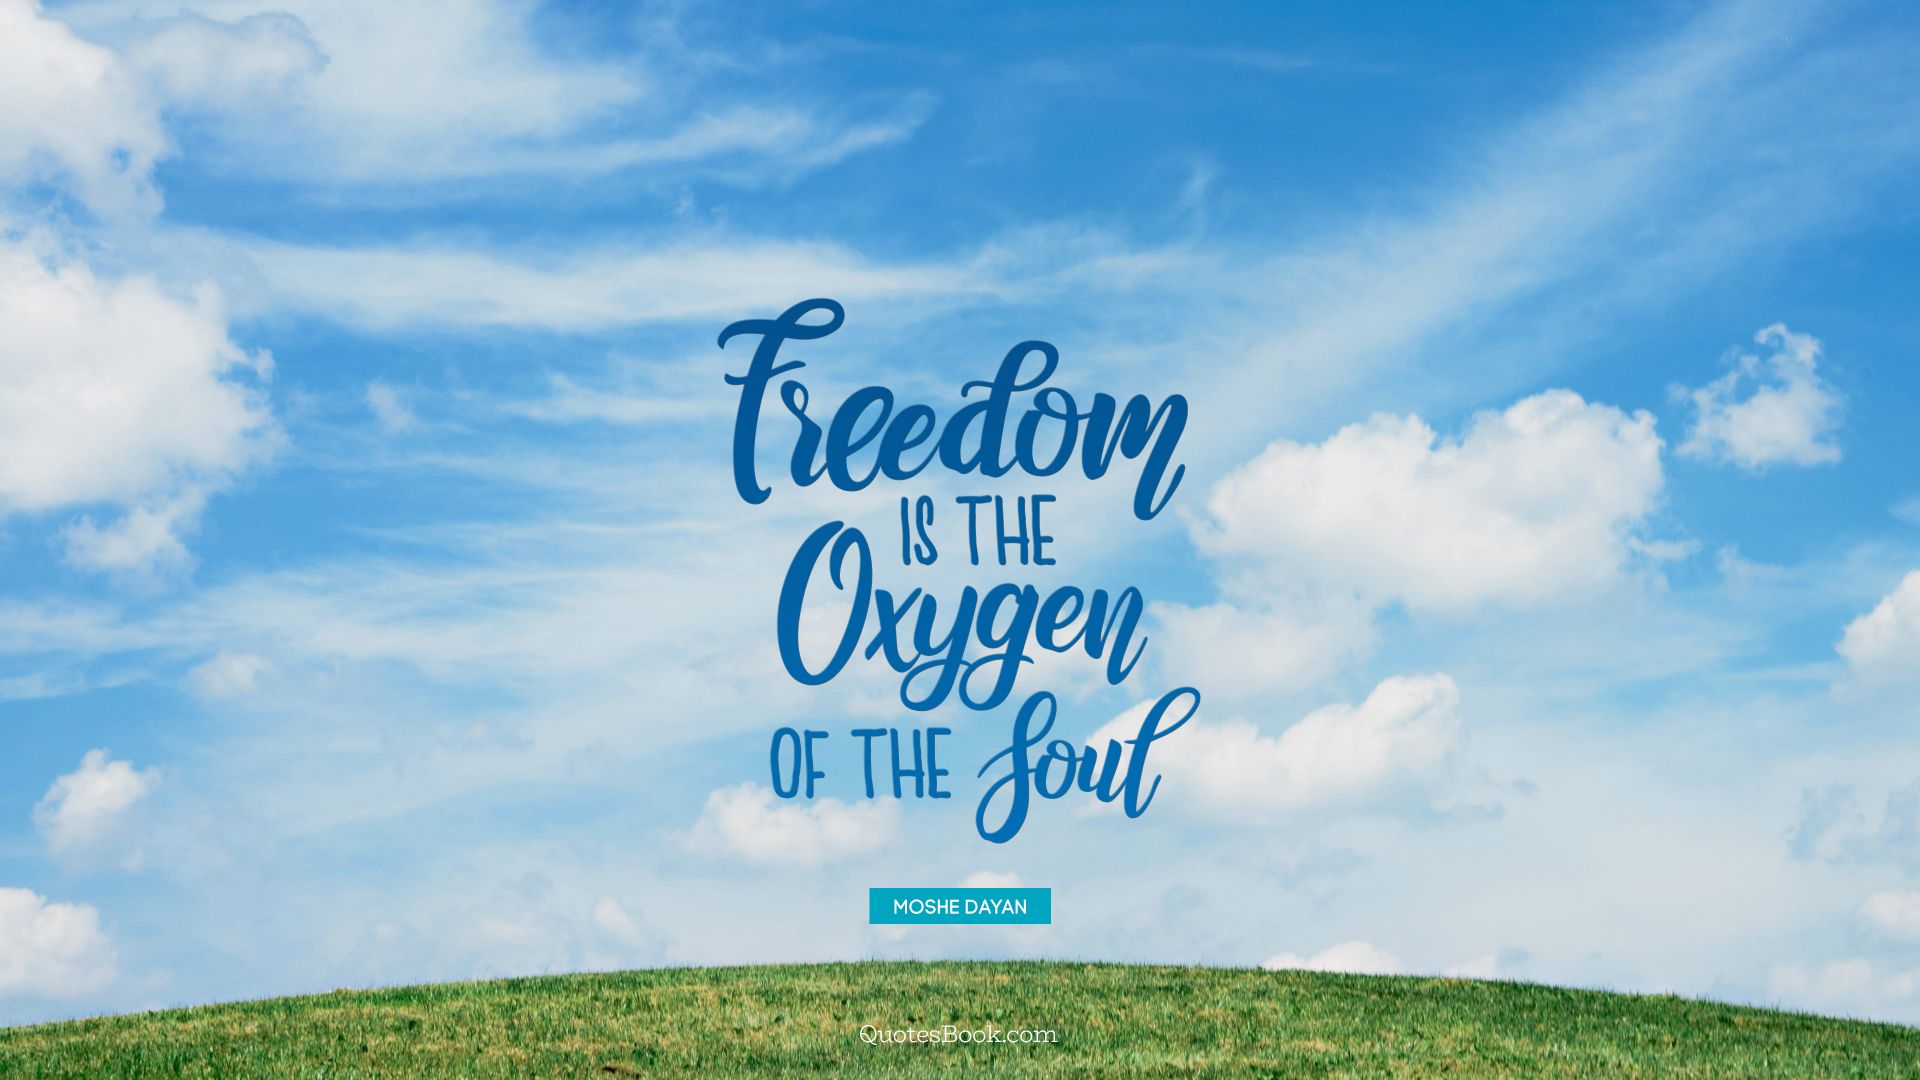 Freedom is the oxygen of the soul. - Quote by Moshe Dayan